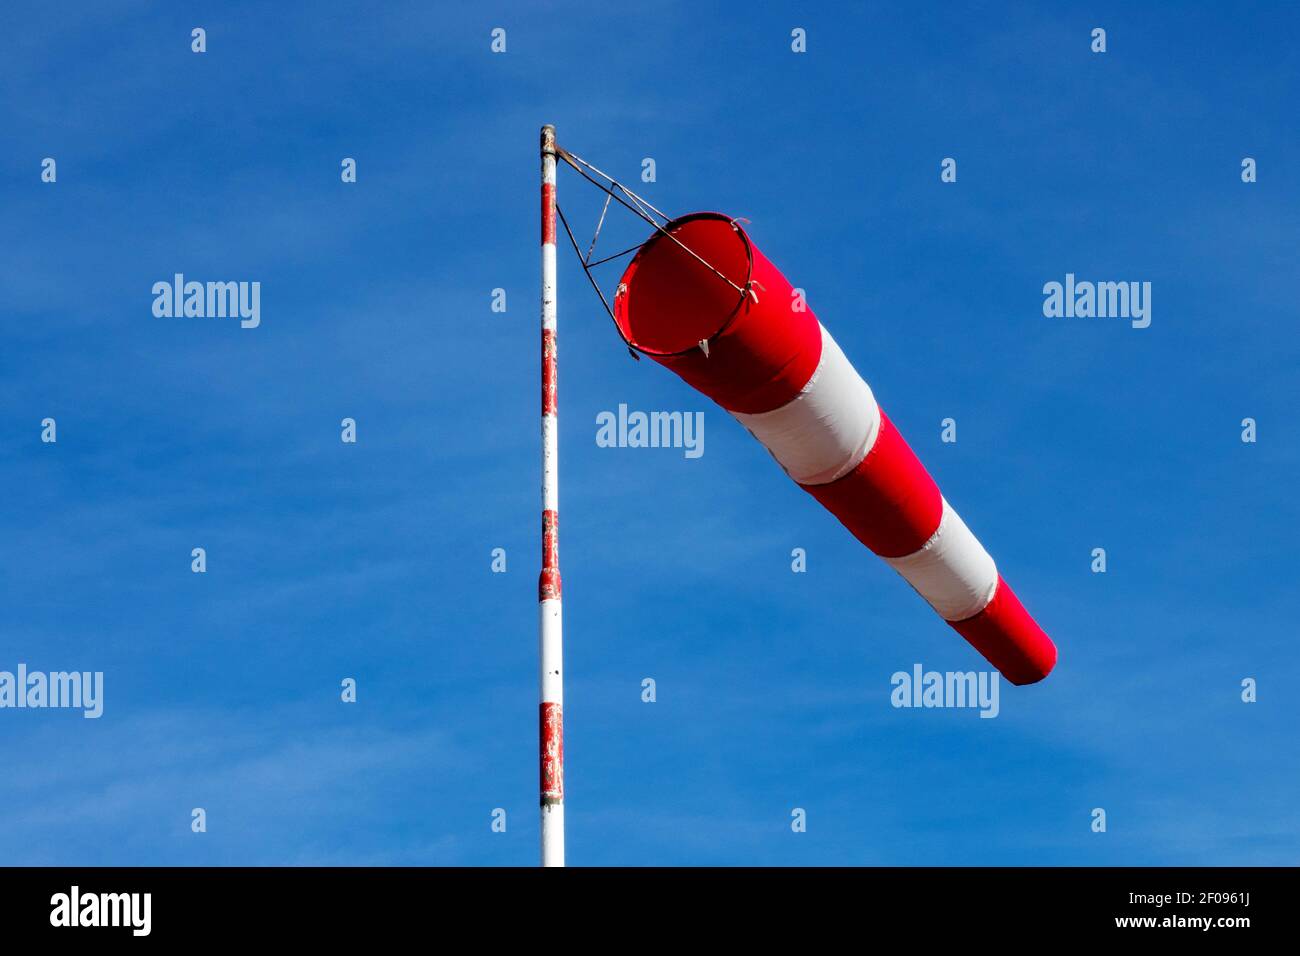 Wind sock red white striped bag on pole against blue sky Stock Photo